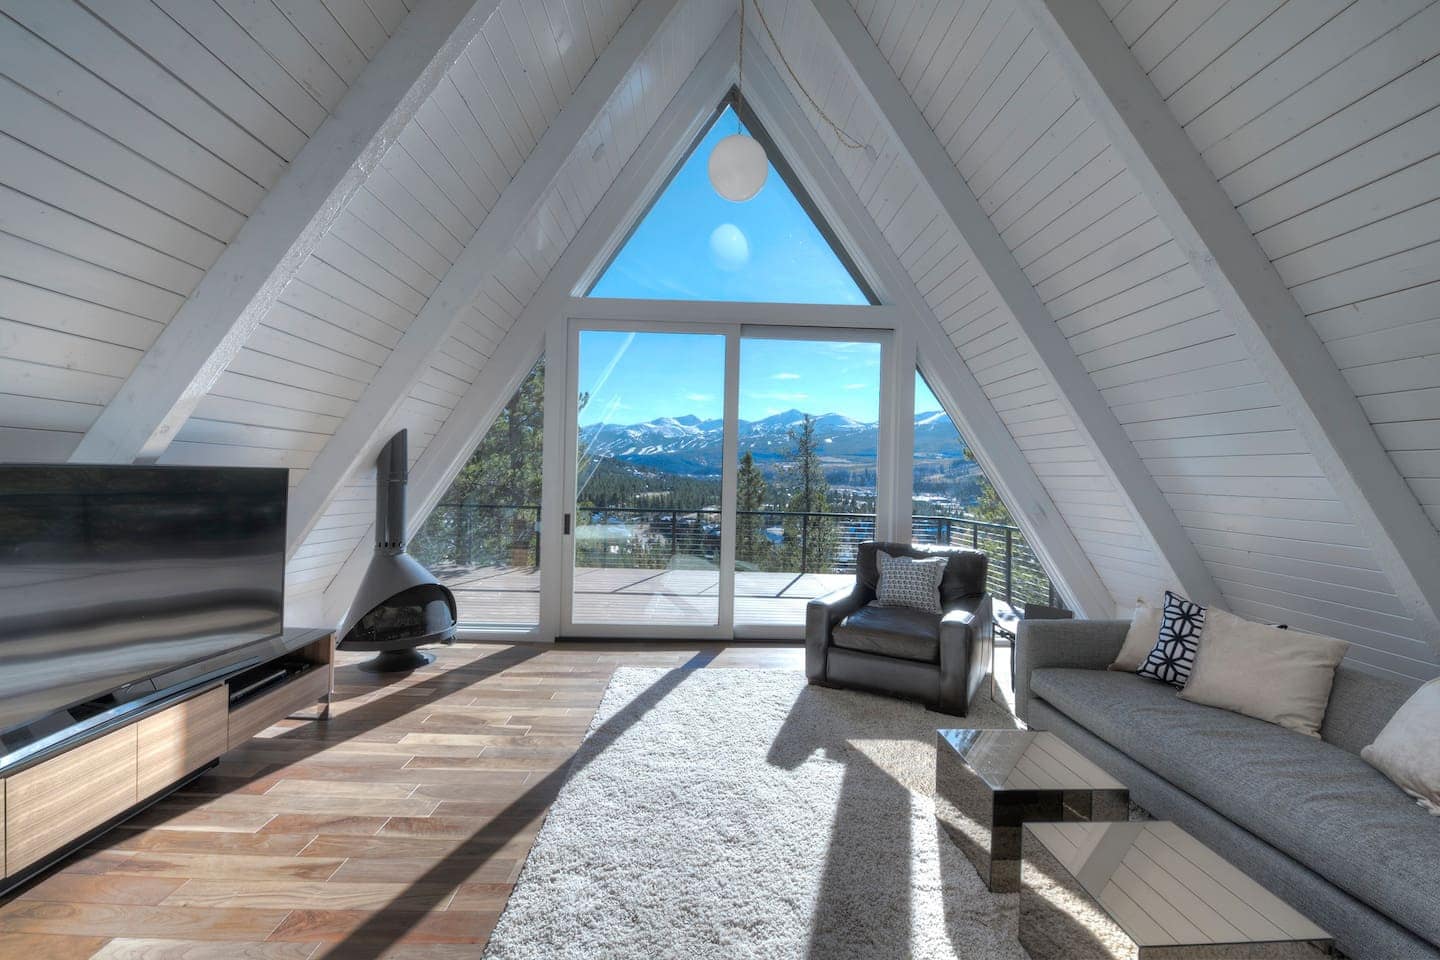 This is a large and airy A-frame home with a view of the mountains.